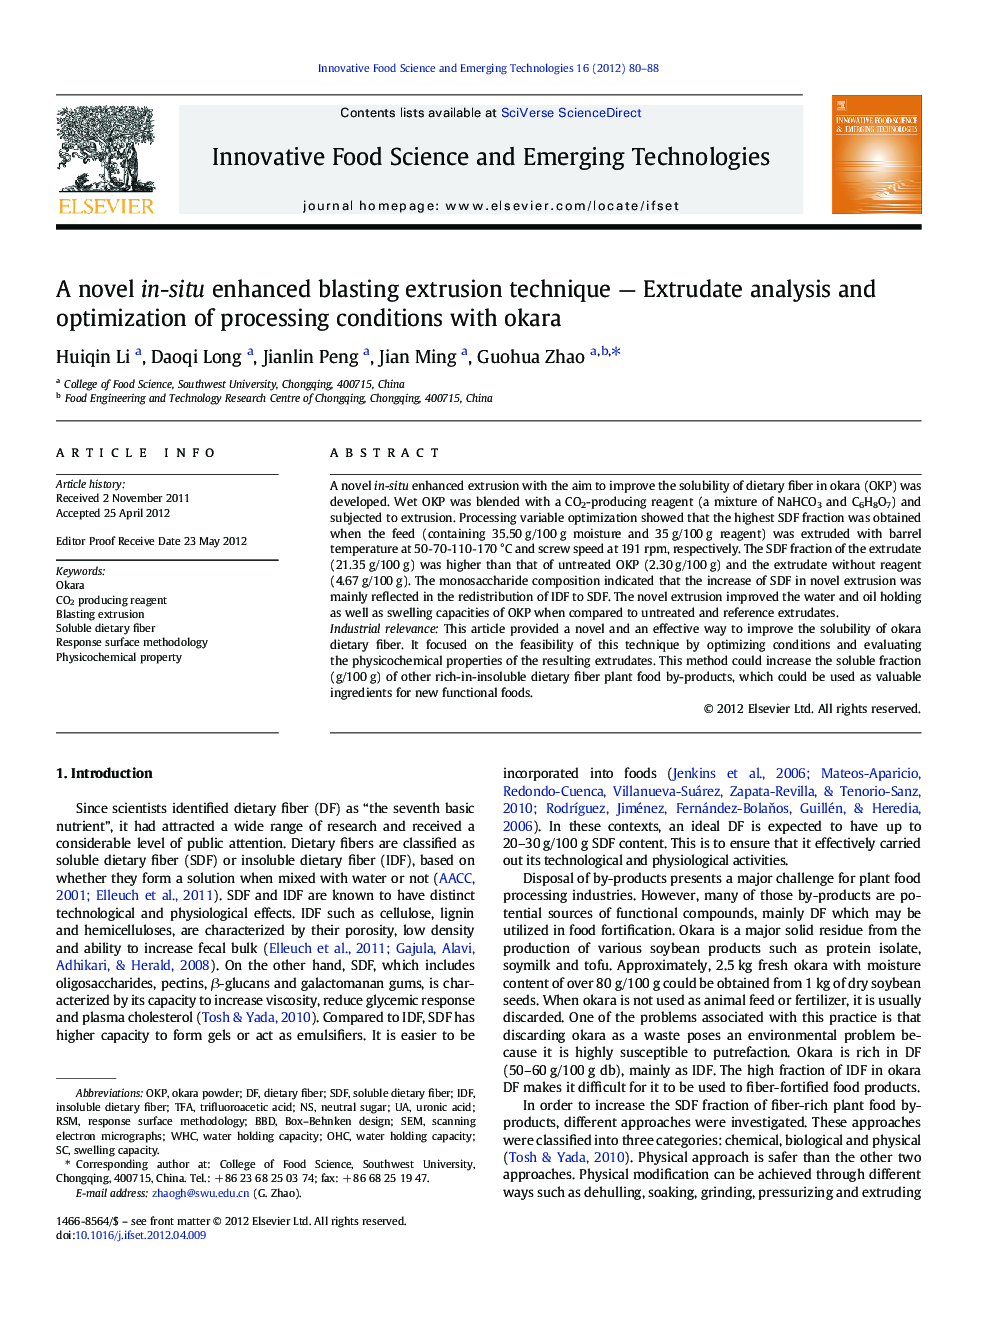 A novel in-situ enhanced blasting extrusion technique — Extrudate analysis and optimization of processing conditions with okara